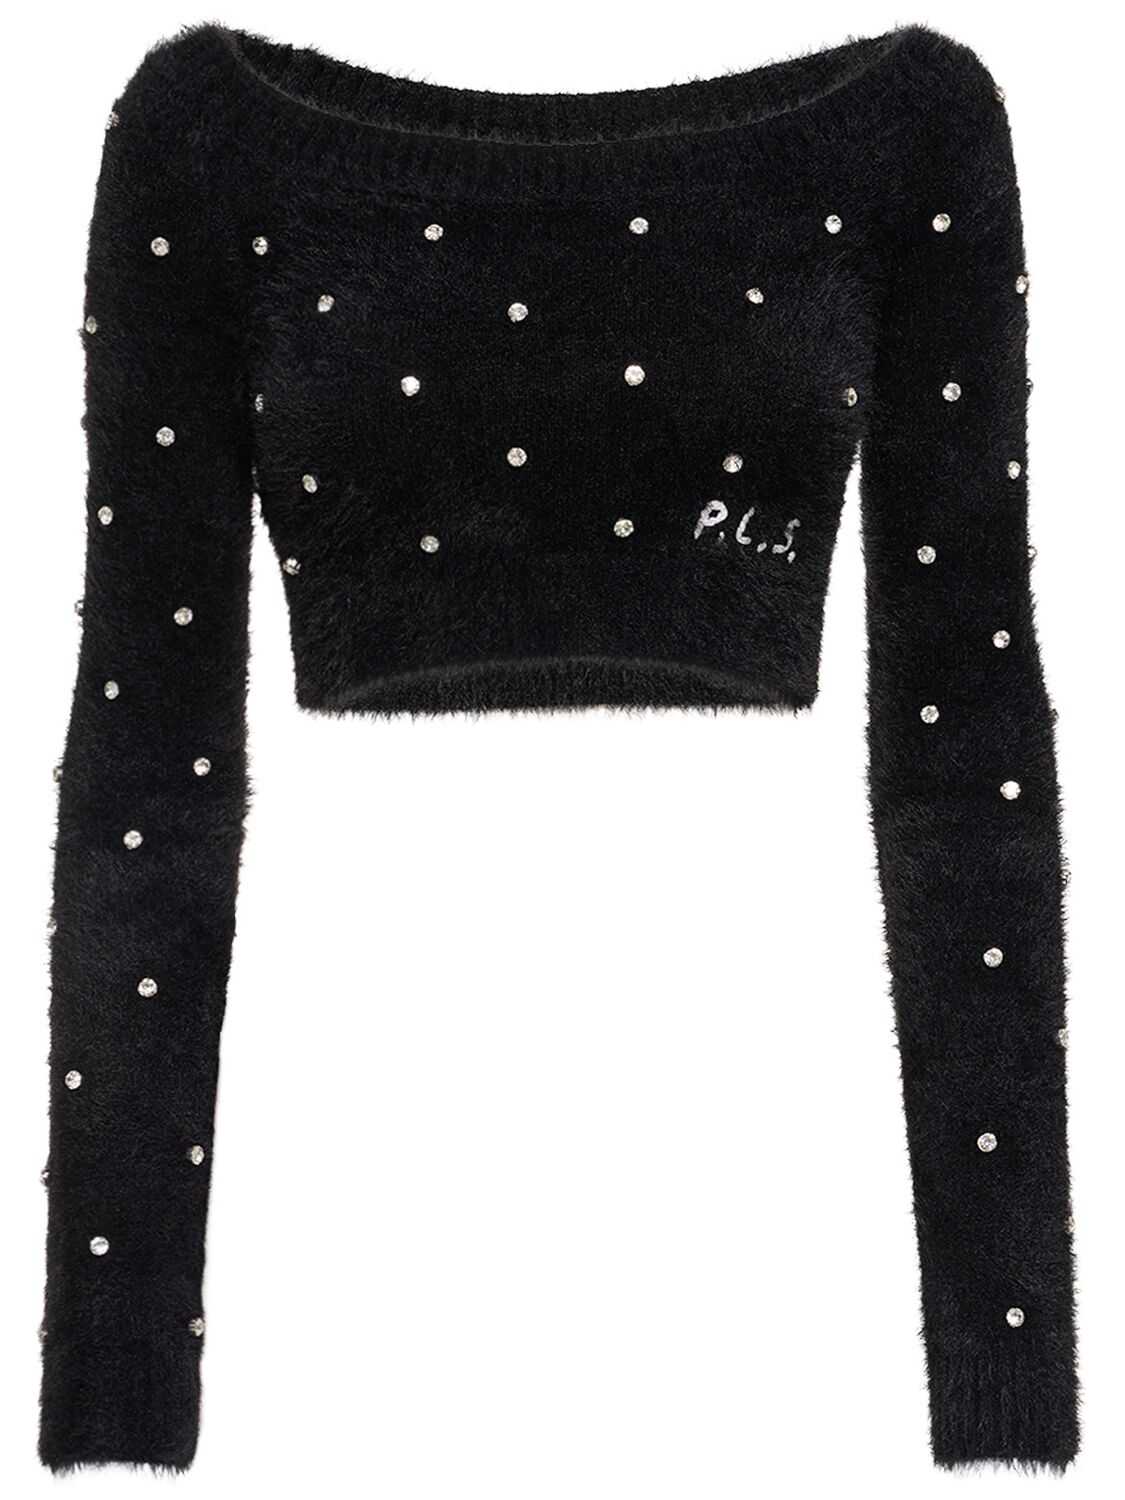 Embellished Fuzzy Cropped Sweater